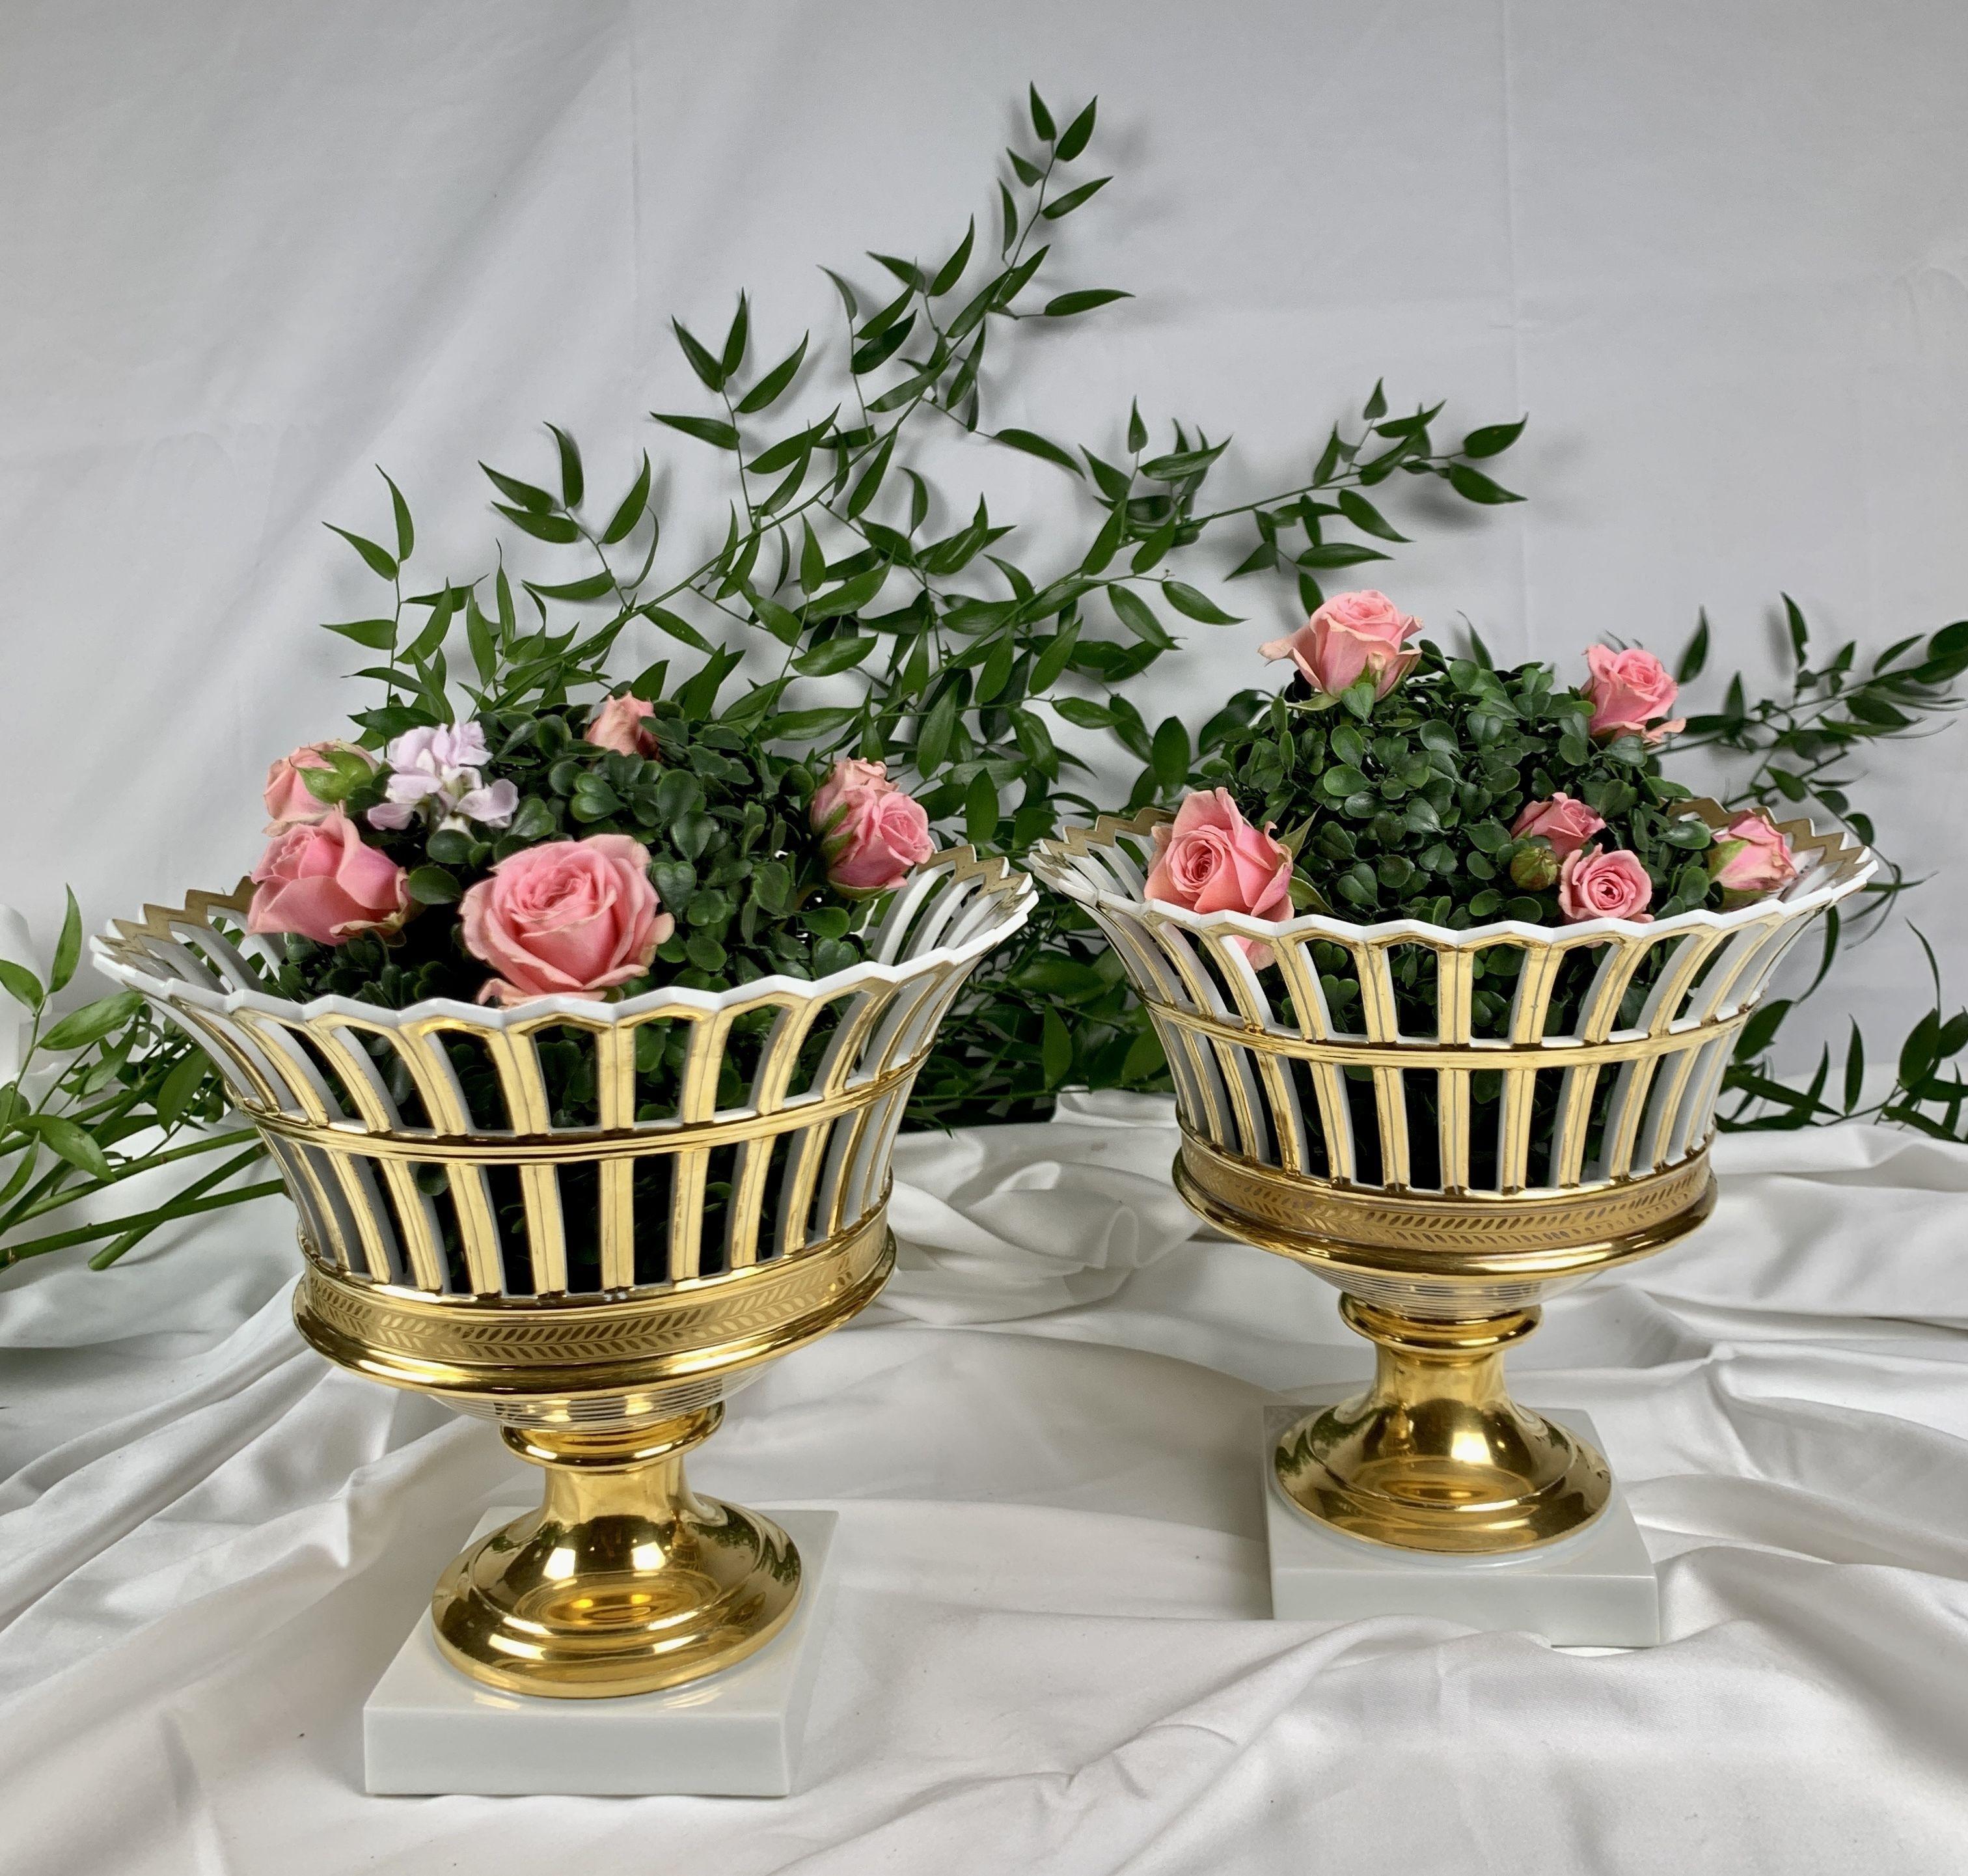 Made in France circa 1860, this beautiful pair of Paris Porcelain baskets are classic French style.
They are elegant and formal with exquisite gilt on crisp white porcelain.
The one decorative touch is a lovely small band of chevrons around the